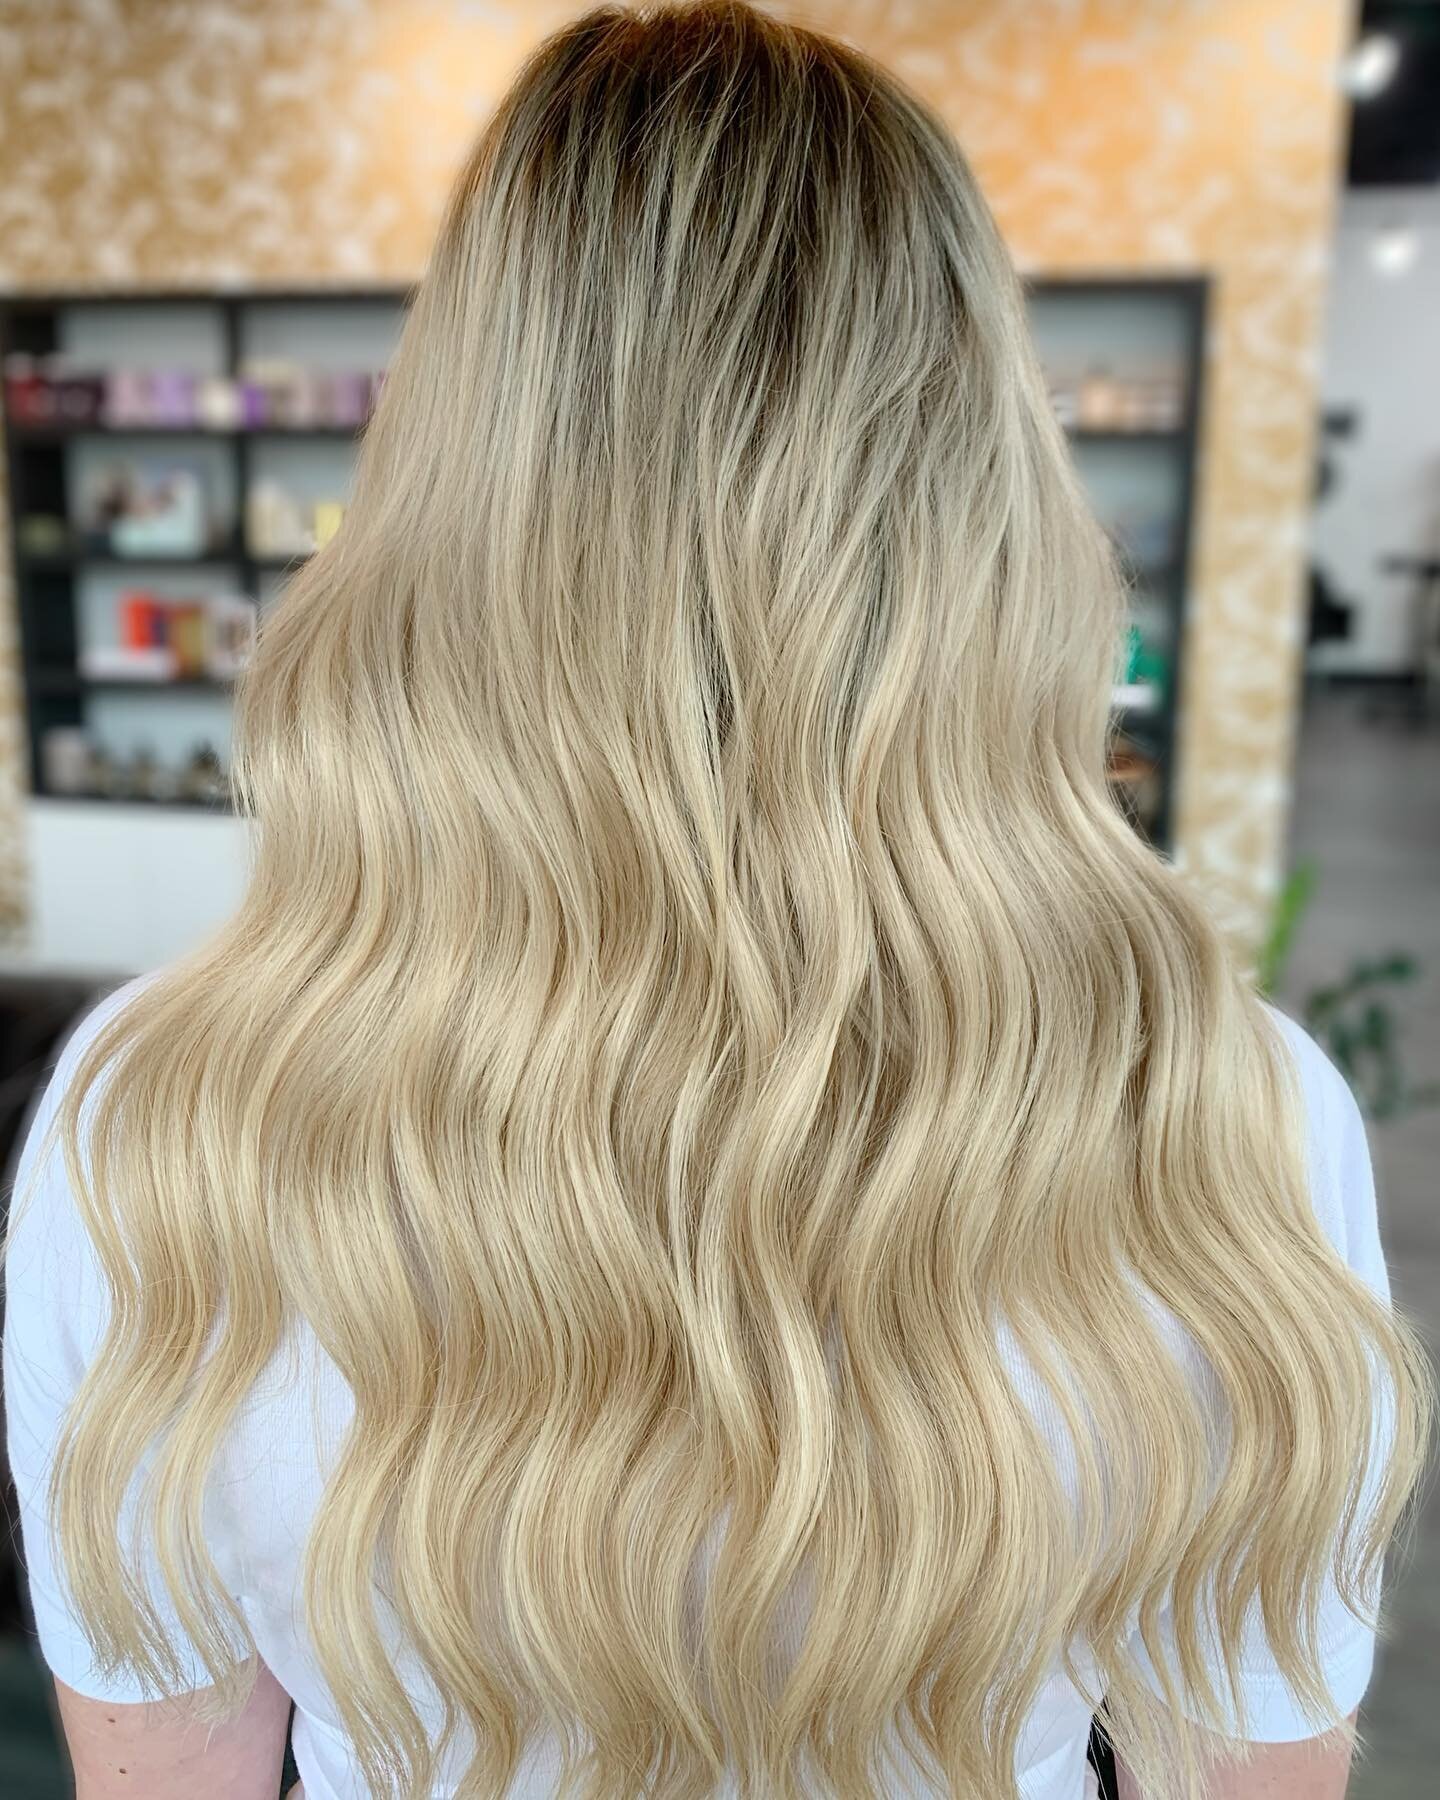 @invisiblebeadextensions are at it again! This lovely guest has fine hair that has breakage from past Heat and bleach usage. We created this amazing transformation with 2 rows and 7 wefts. Dreams do come true!